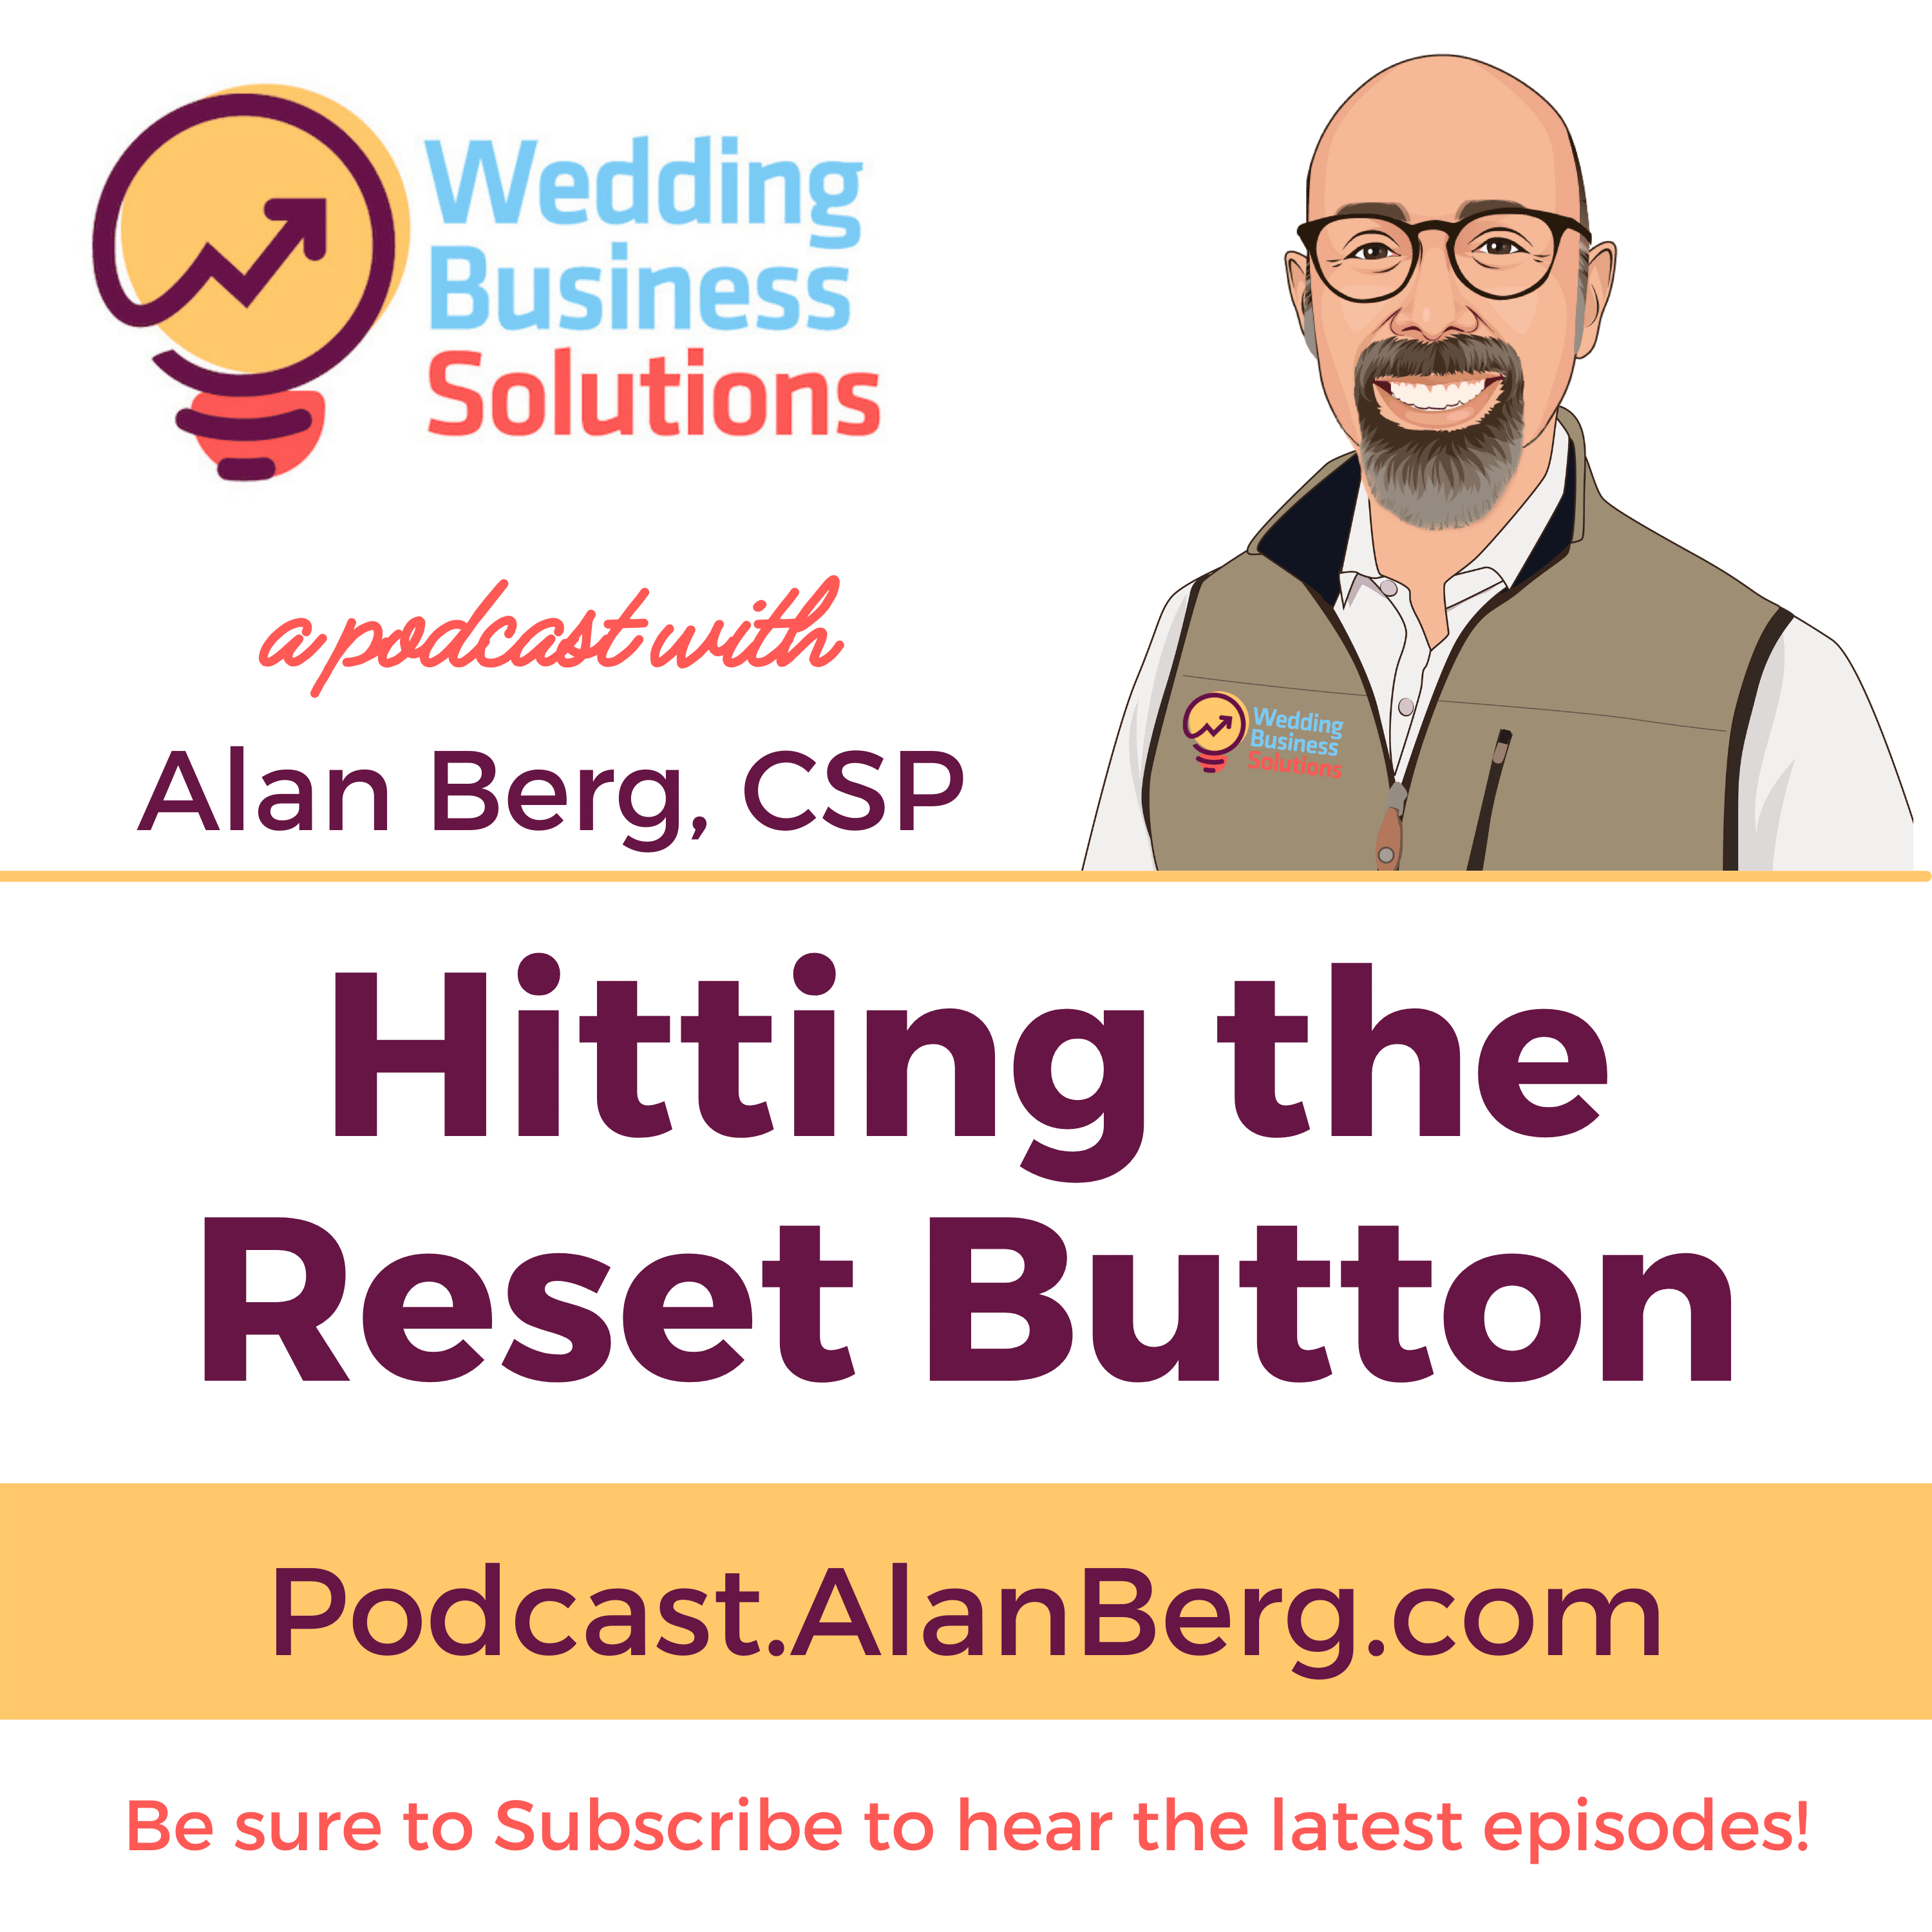 Hitting the Reset Button - Alan Berg CSP, Wedding Business Solutions Podcast